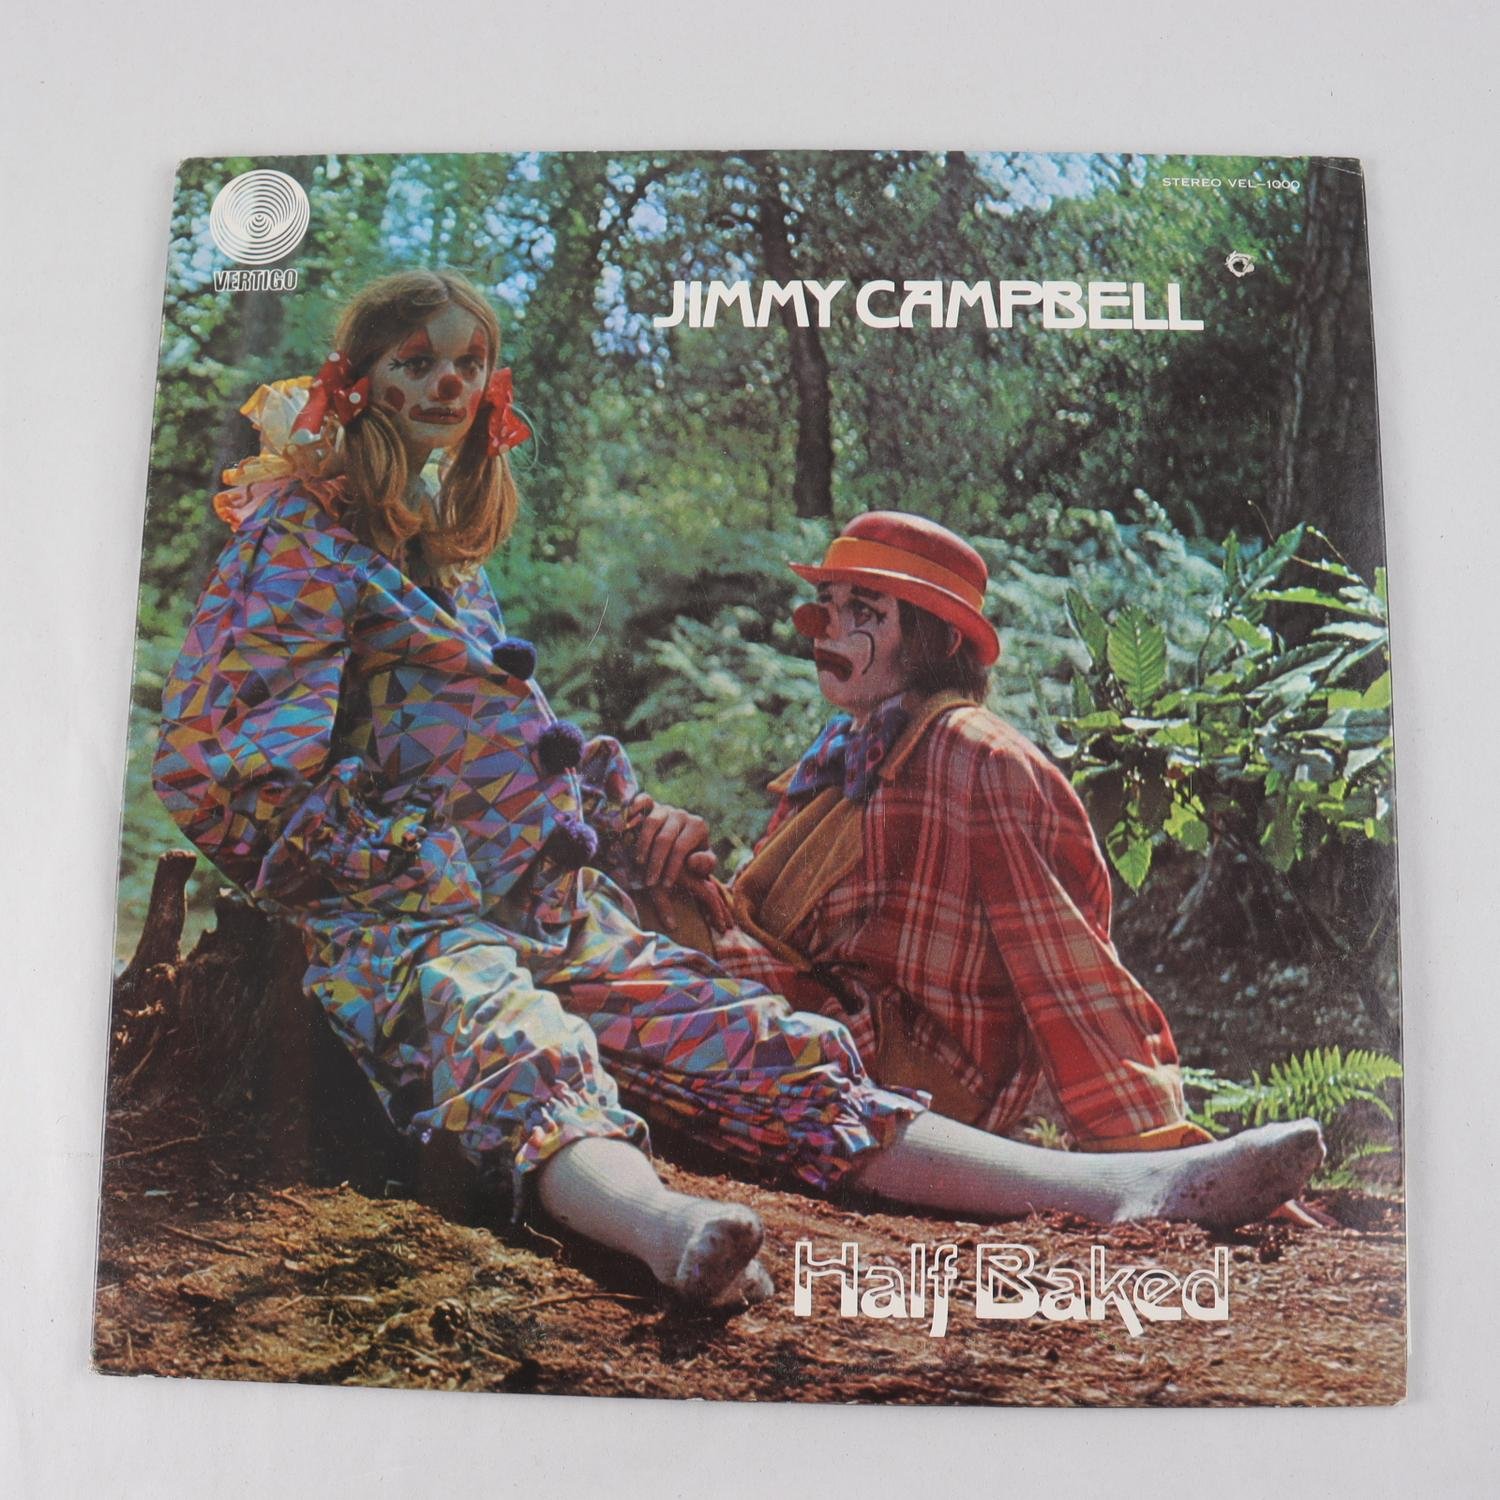 LP Jimmy Campbell, Half Baked